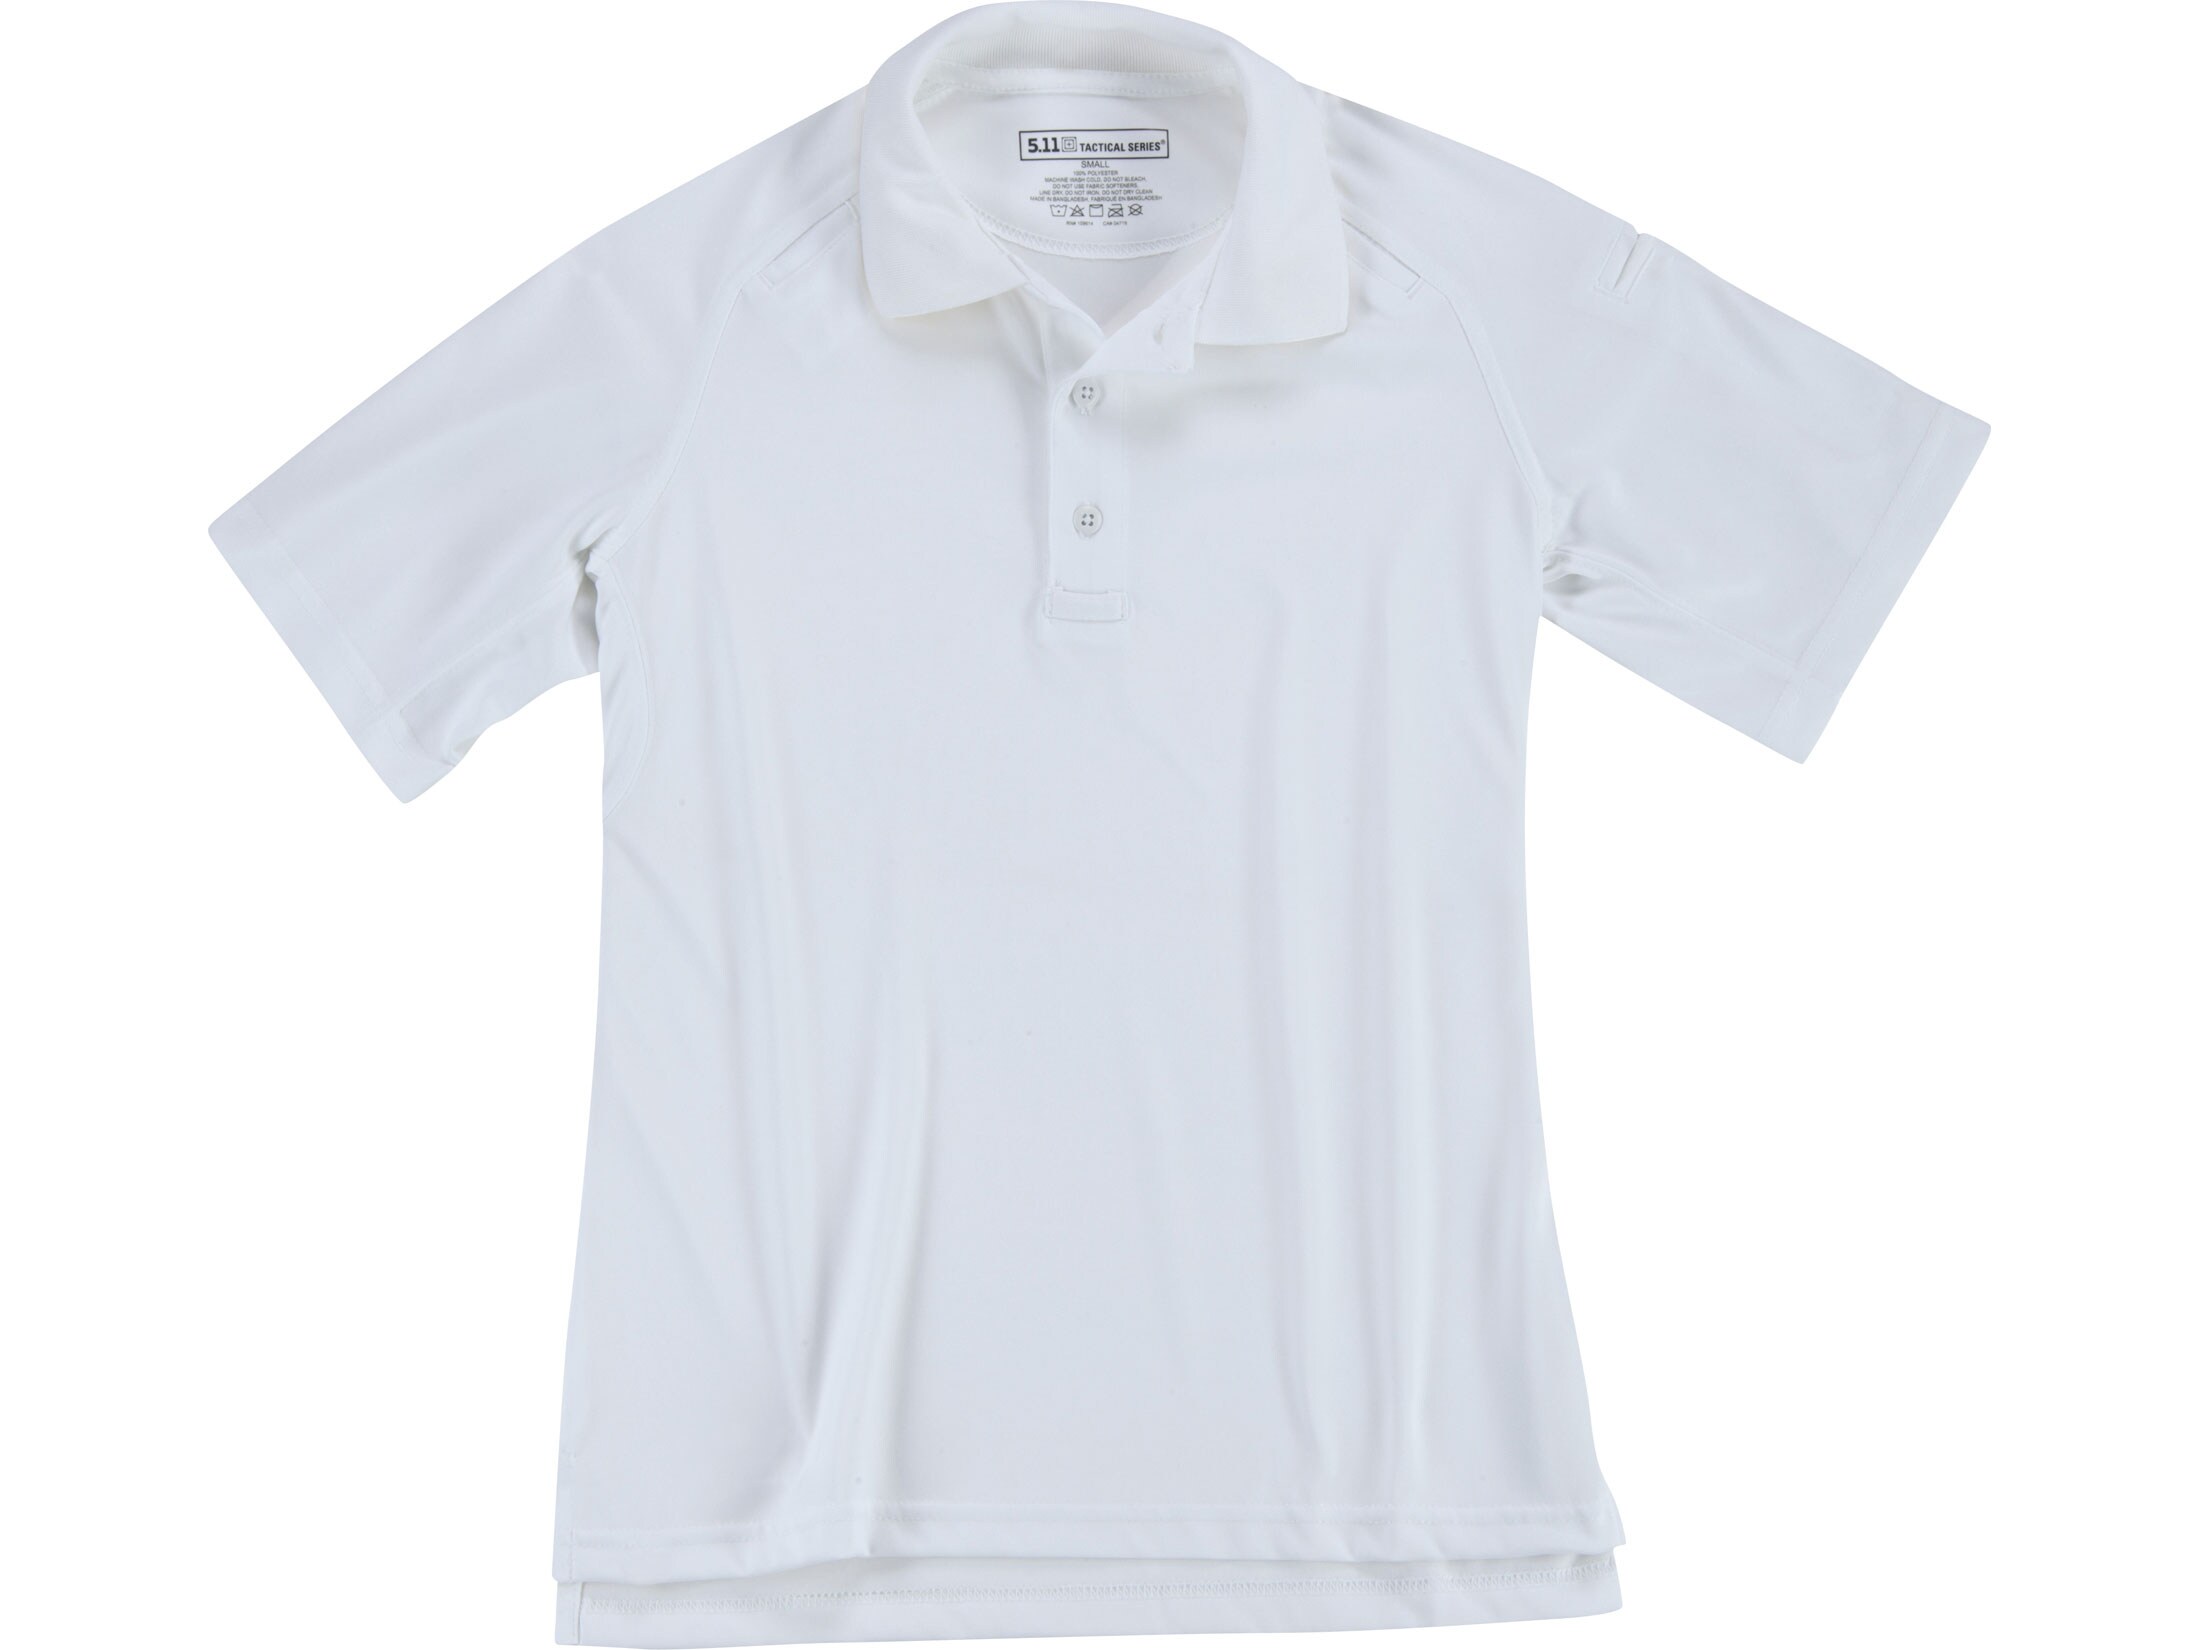 5.11 Women's Performance Polo Short Sleeve Polyester White Small